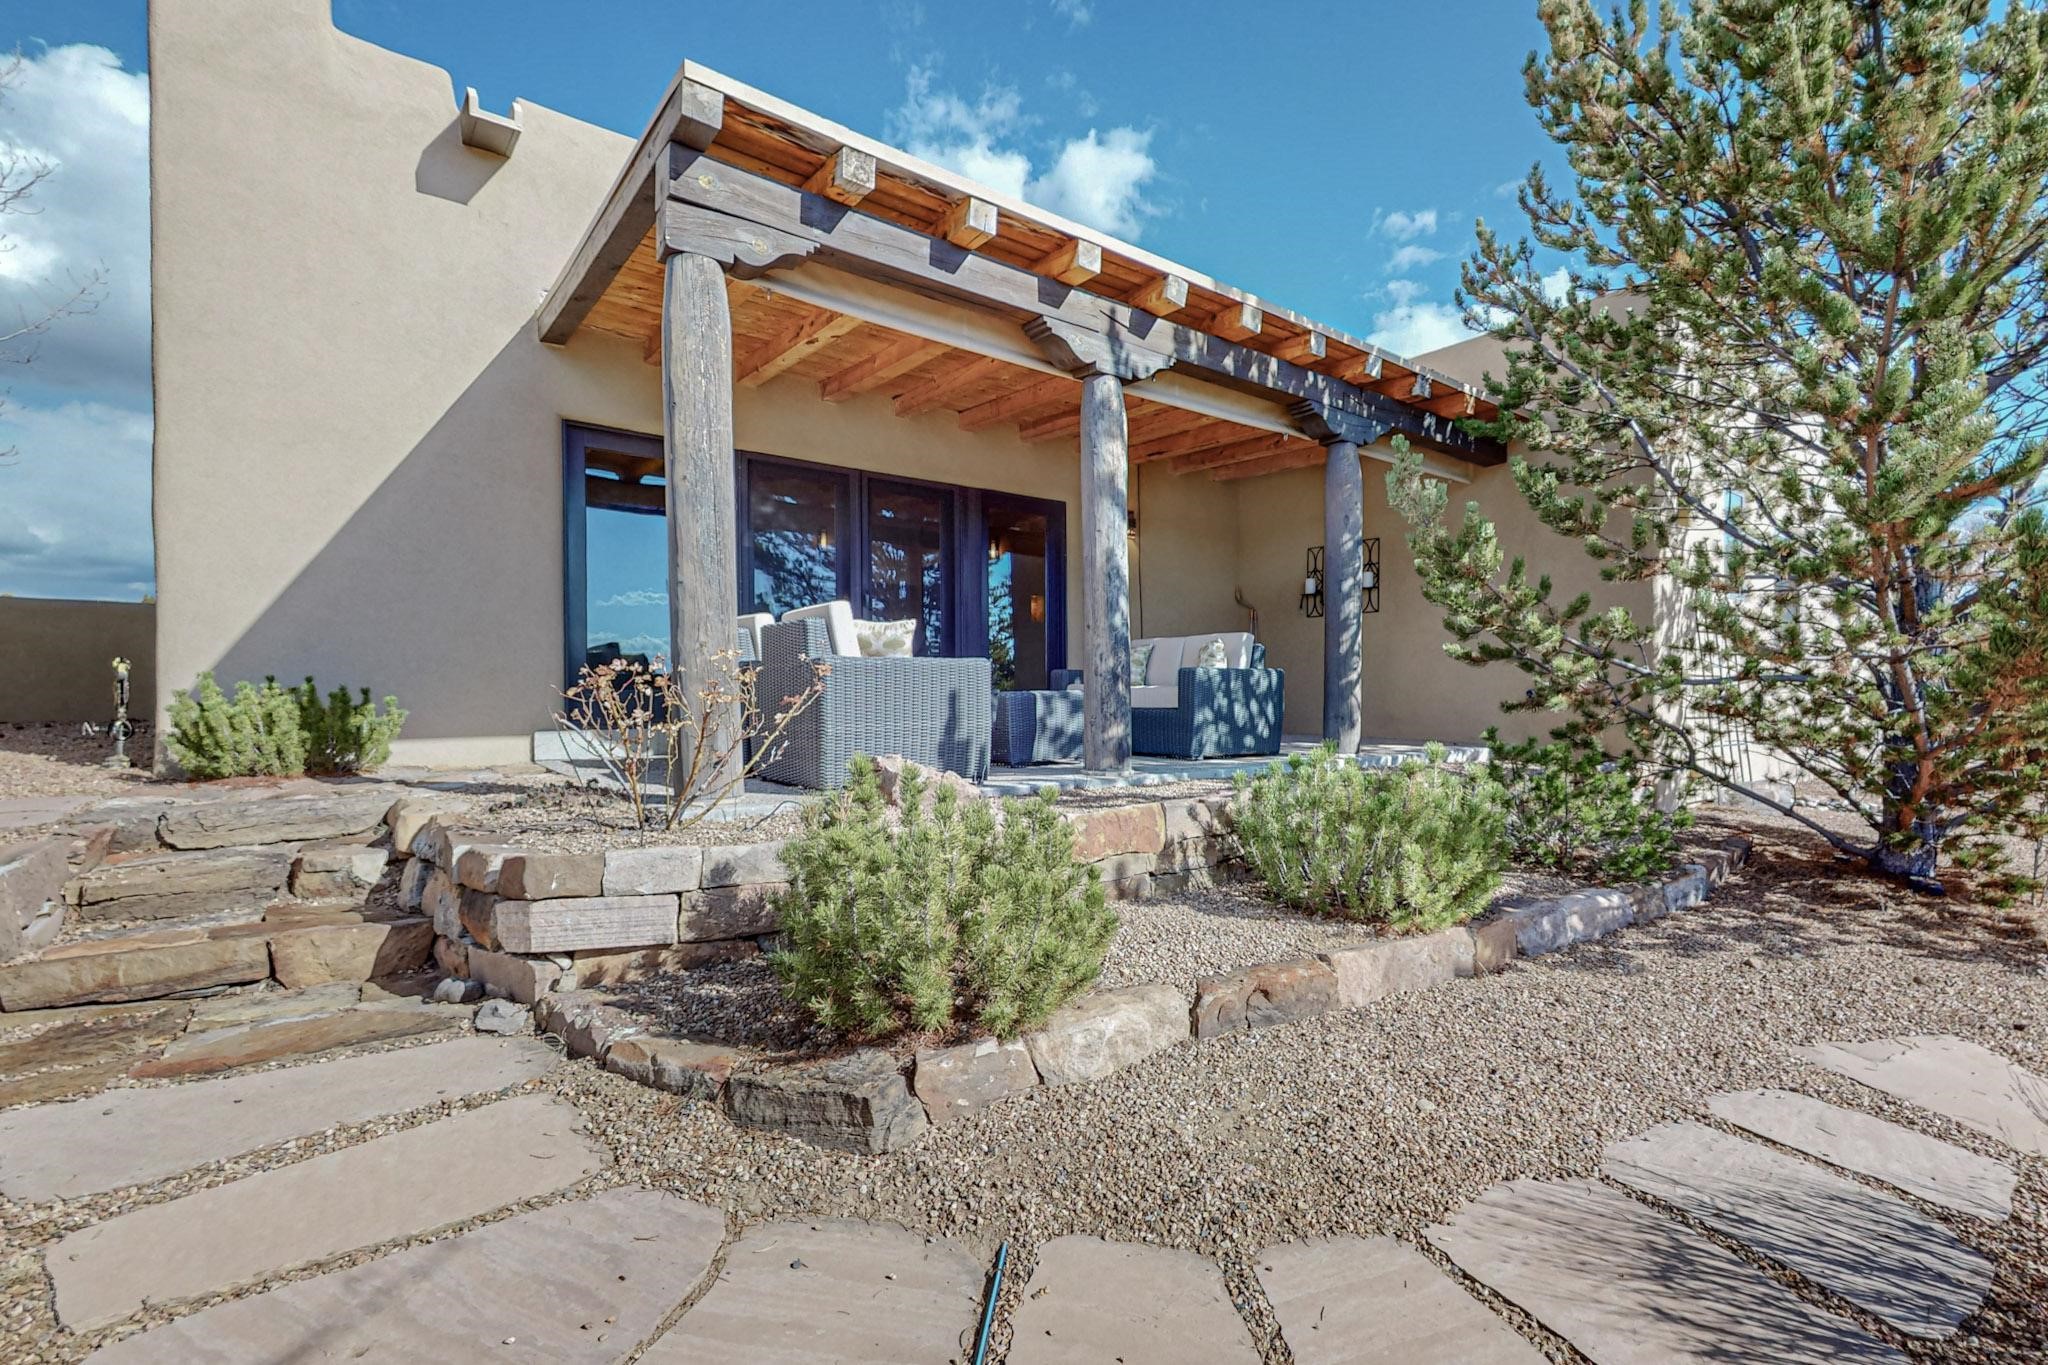 4 E Sand Sage, Santa Fe, New Mexico 87506, 3 Bedrooms Bedrooms, ,3 BathroomsBathrooms,Residential,For Sale,4 E Sand Sage,202400509